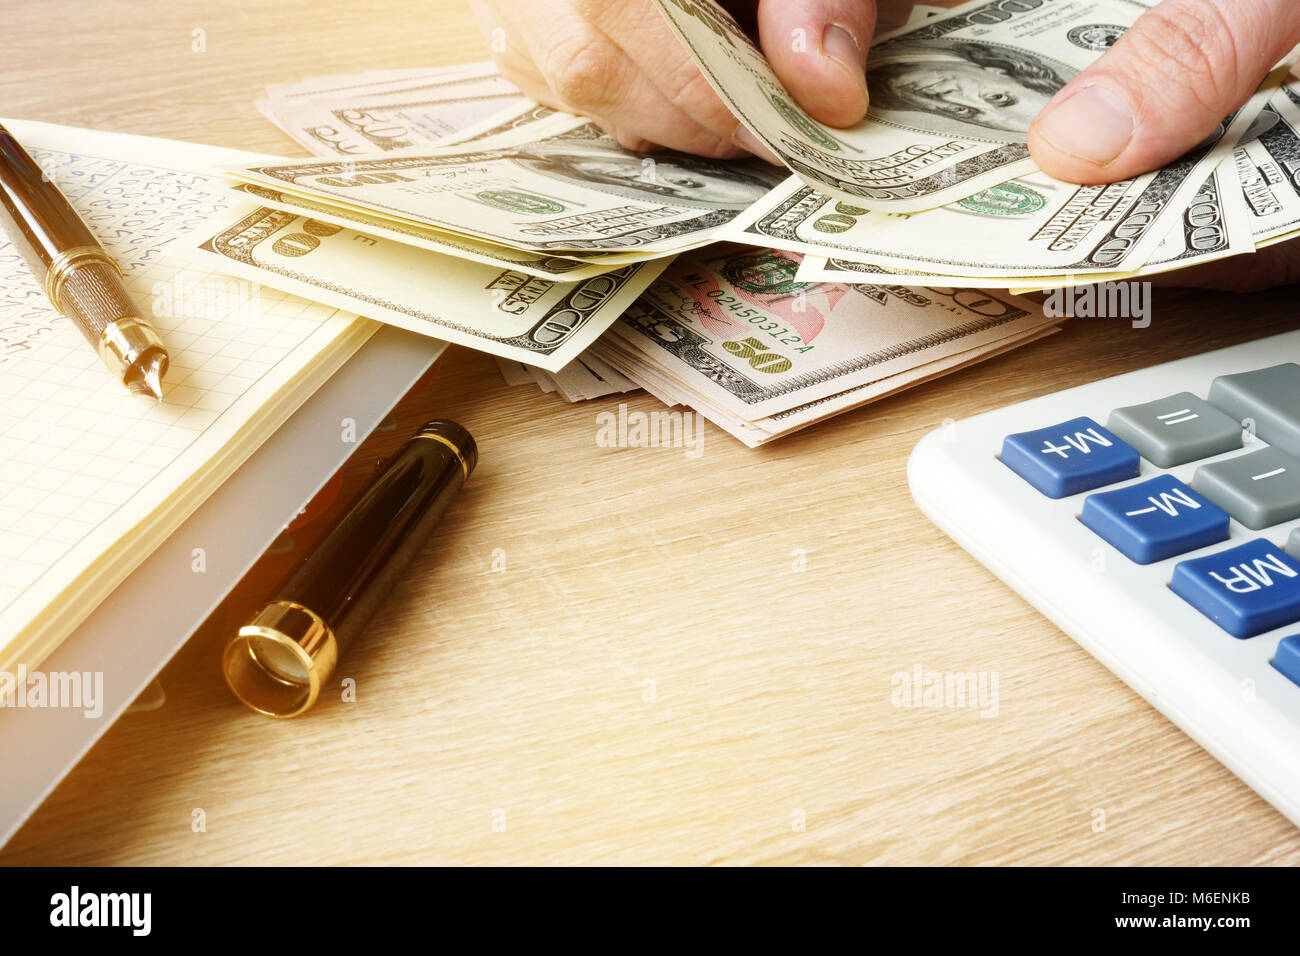 Hands counting money. Home budget. US dollars bills. Stock Photo